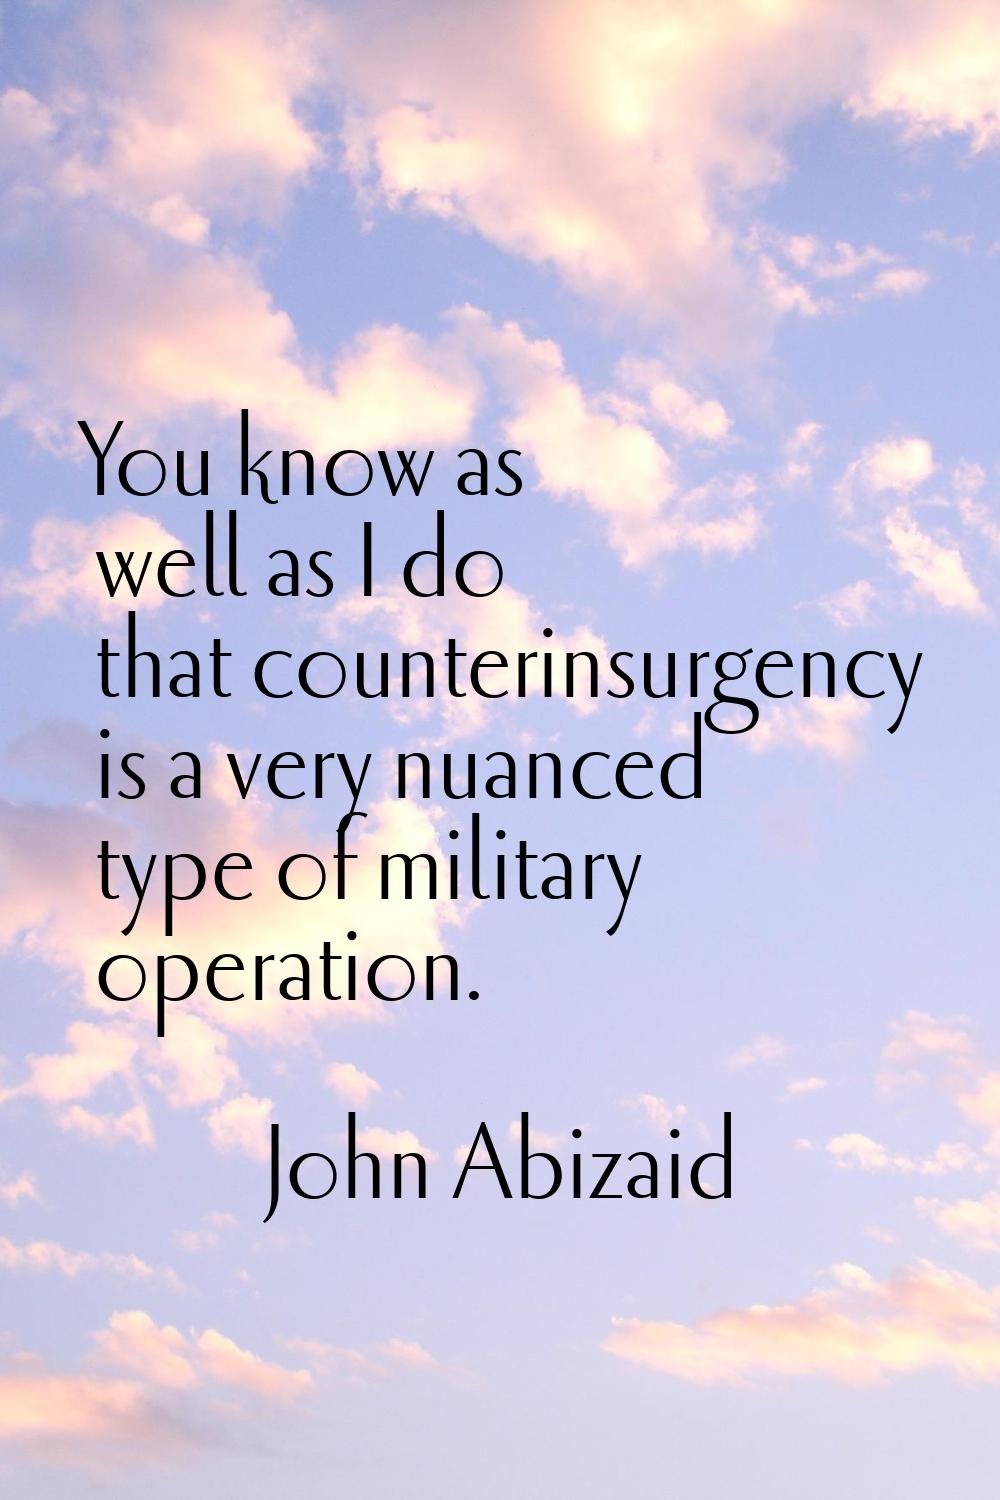 You know as well as I do that counterinsurgency is a very nuanced type of military operation.